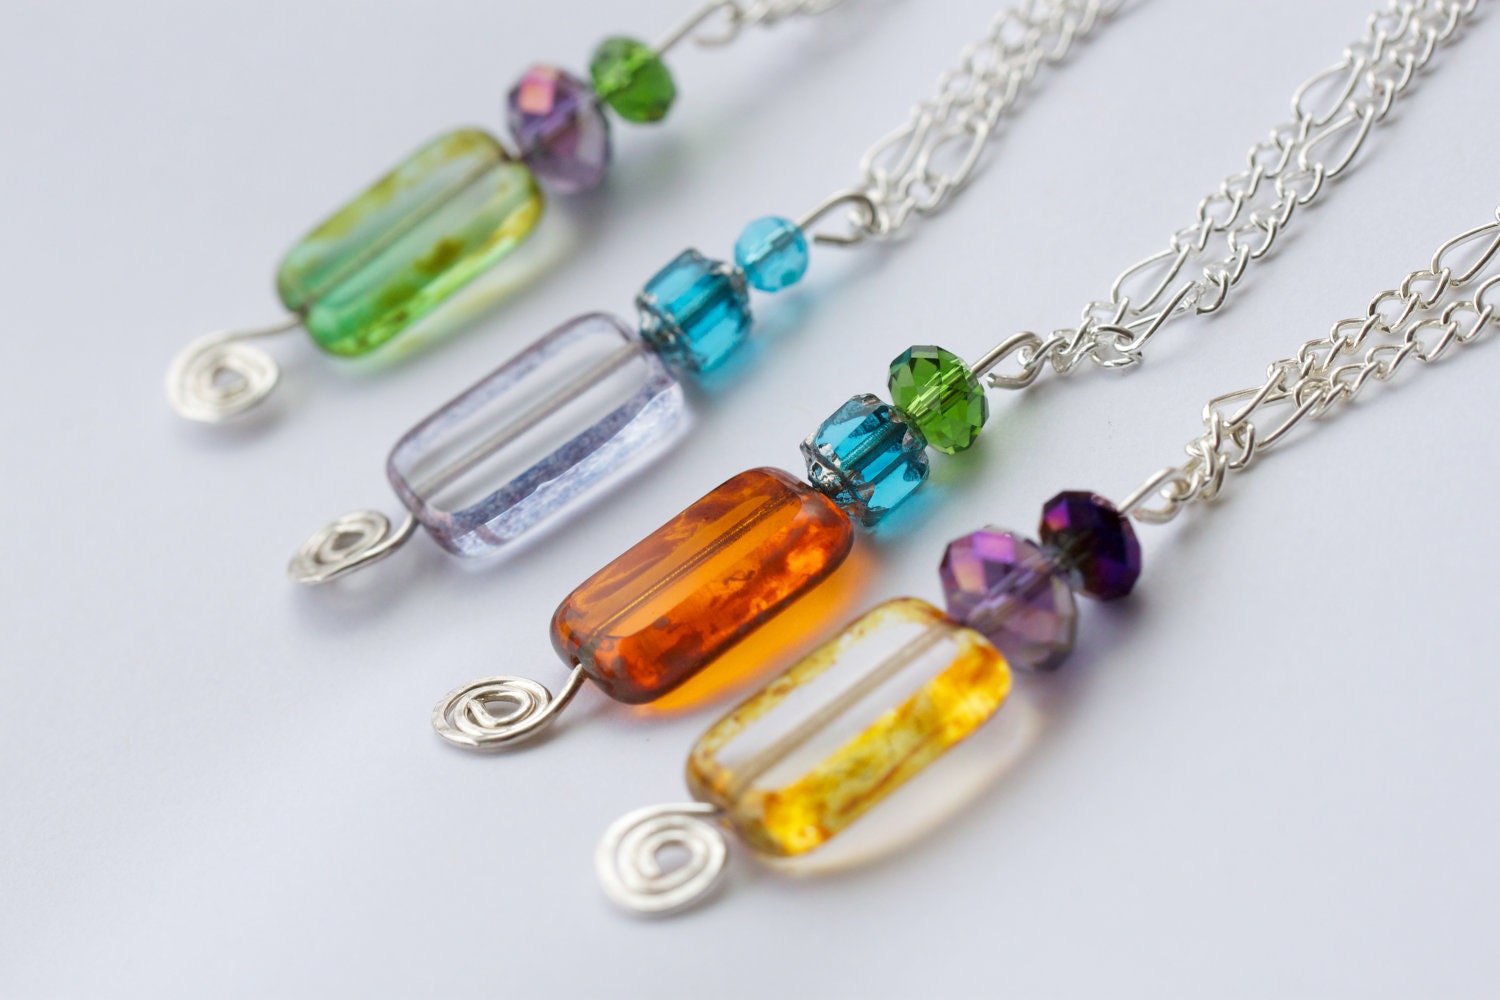 Choose from a Rainbow of Swirl Pendant Necklaces - Lavender ,Yellow, Orange or Green Hammered Spiral Charm on Silver Plated Chain